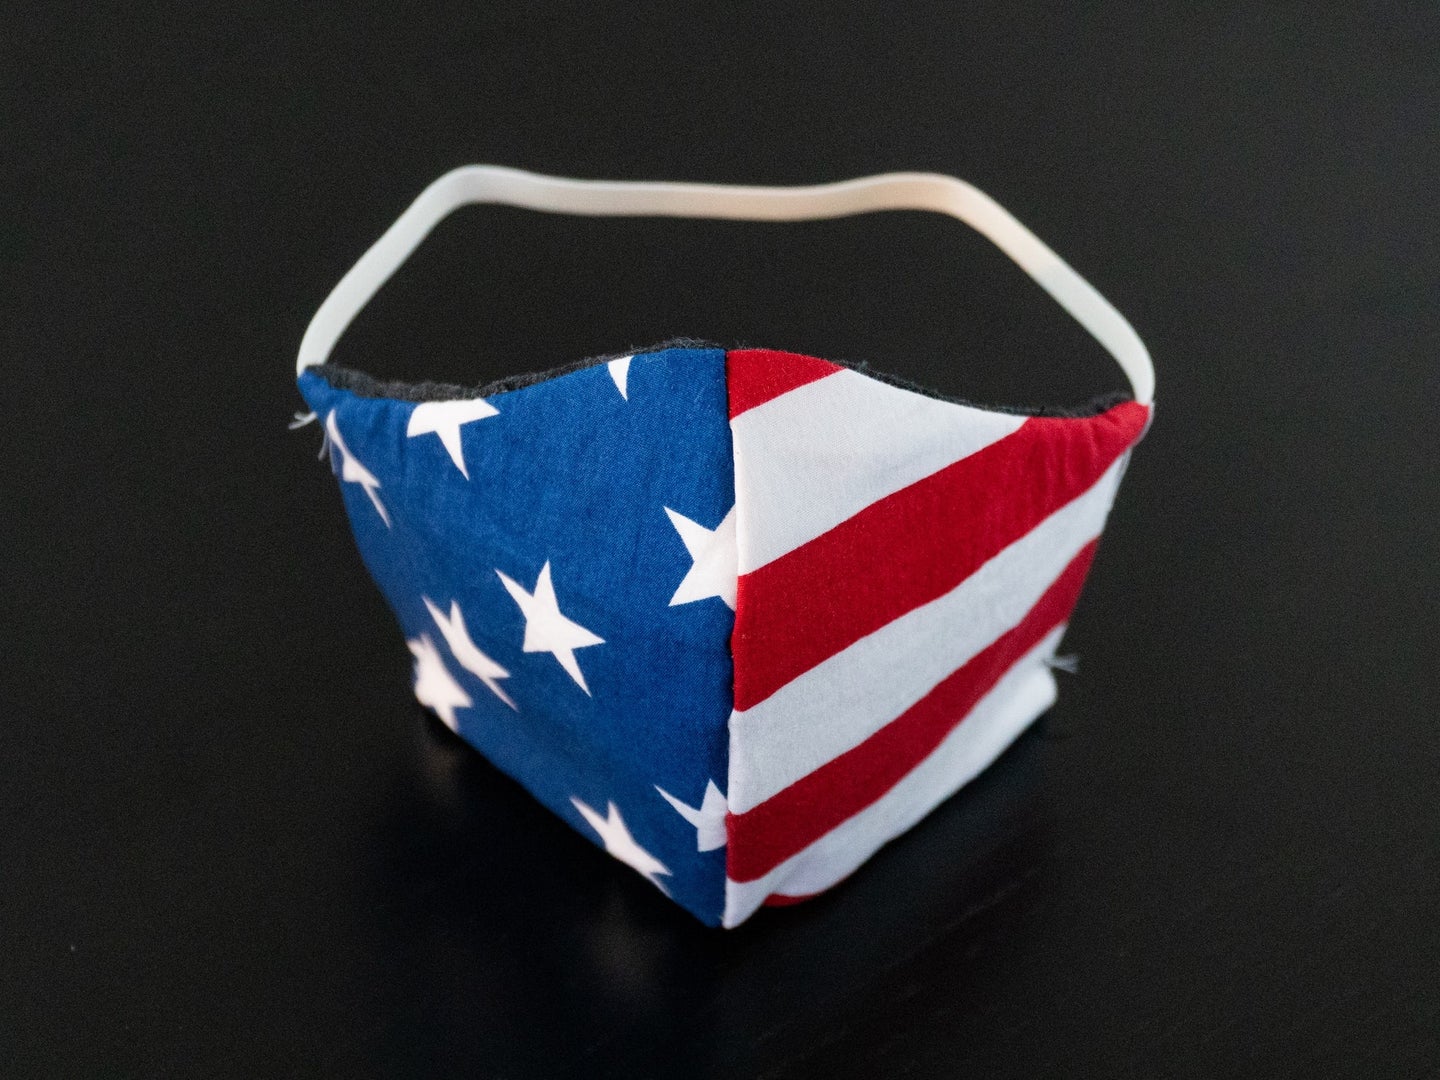 an American-flag patterned face mask on a black background.